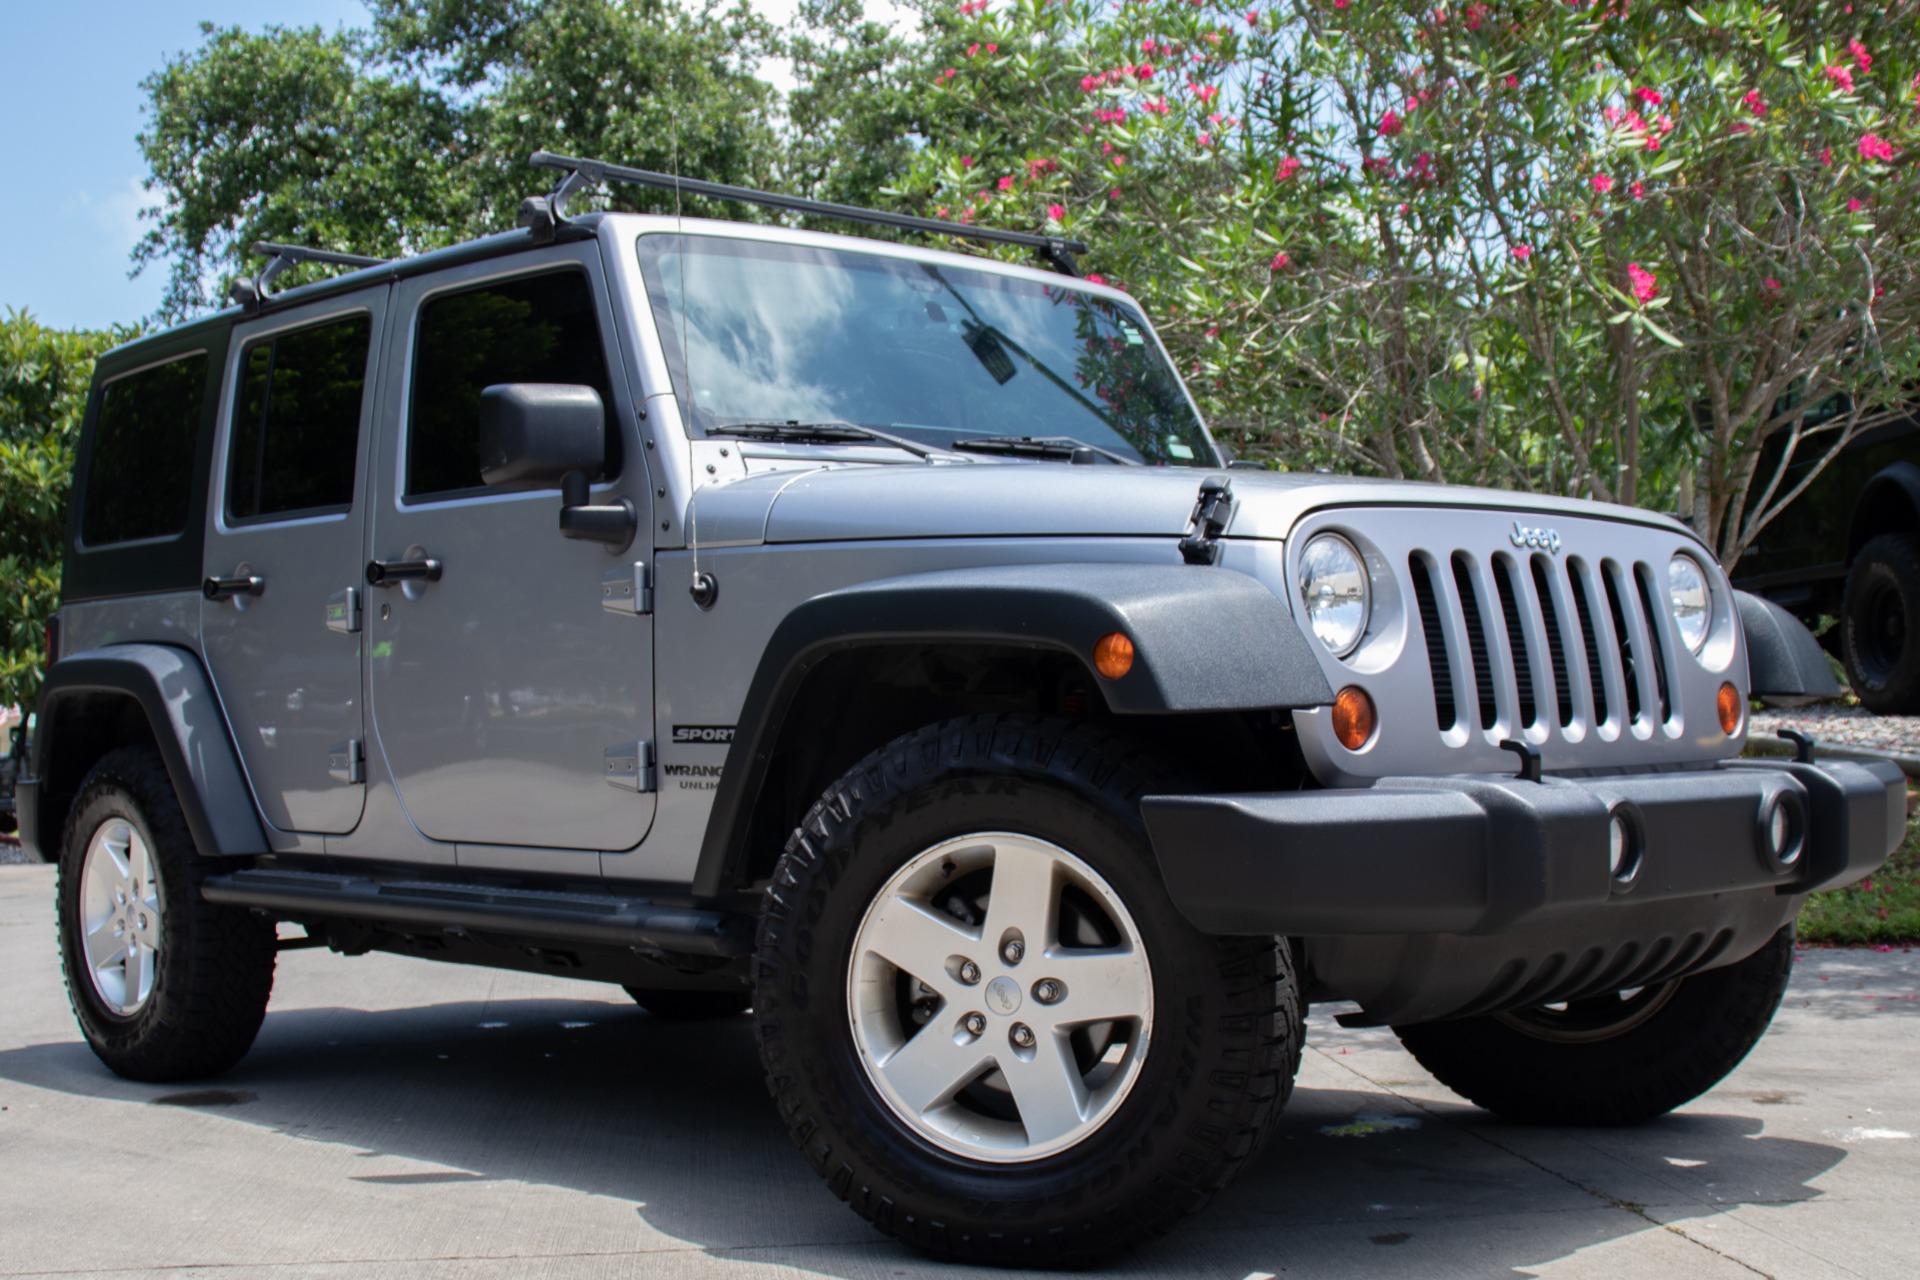 Used 2013 Jeep Wrangler Unlimited Sport For Sale ($26,995) | Select Jeeps  Inc. Stock #660508